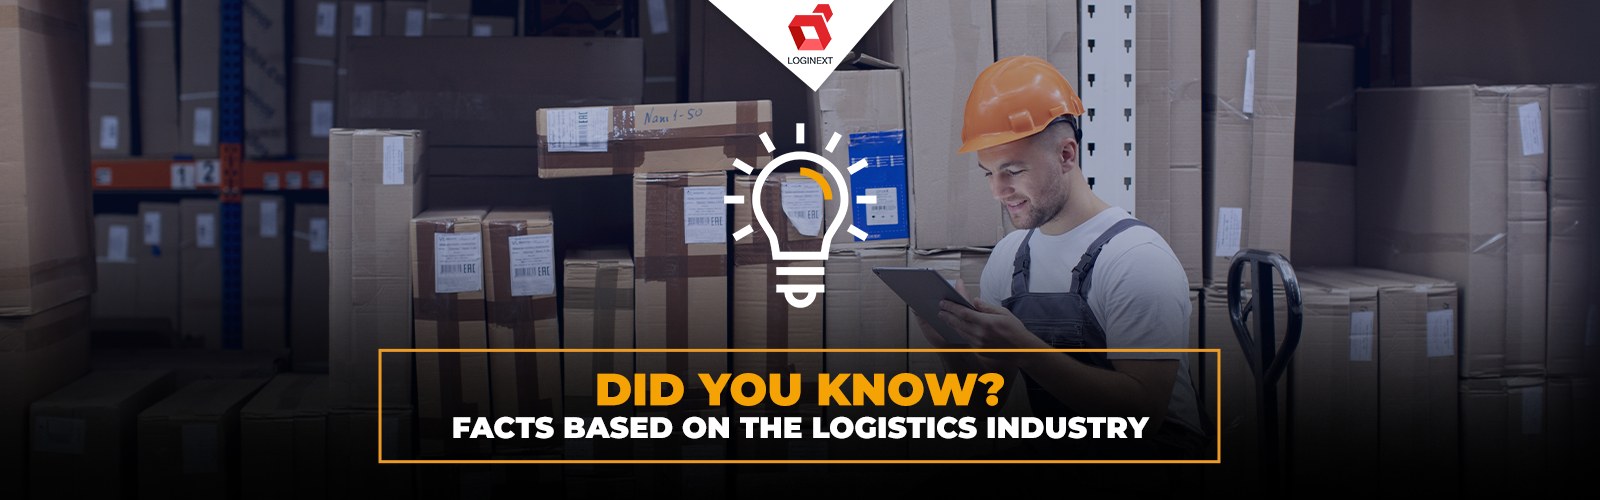 Did you know about these facts based on the logistics industry_